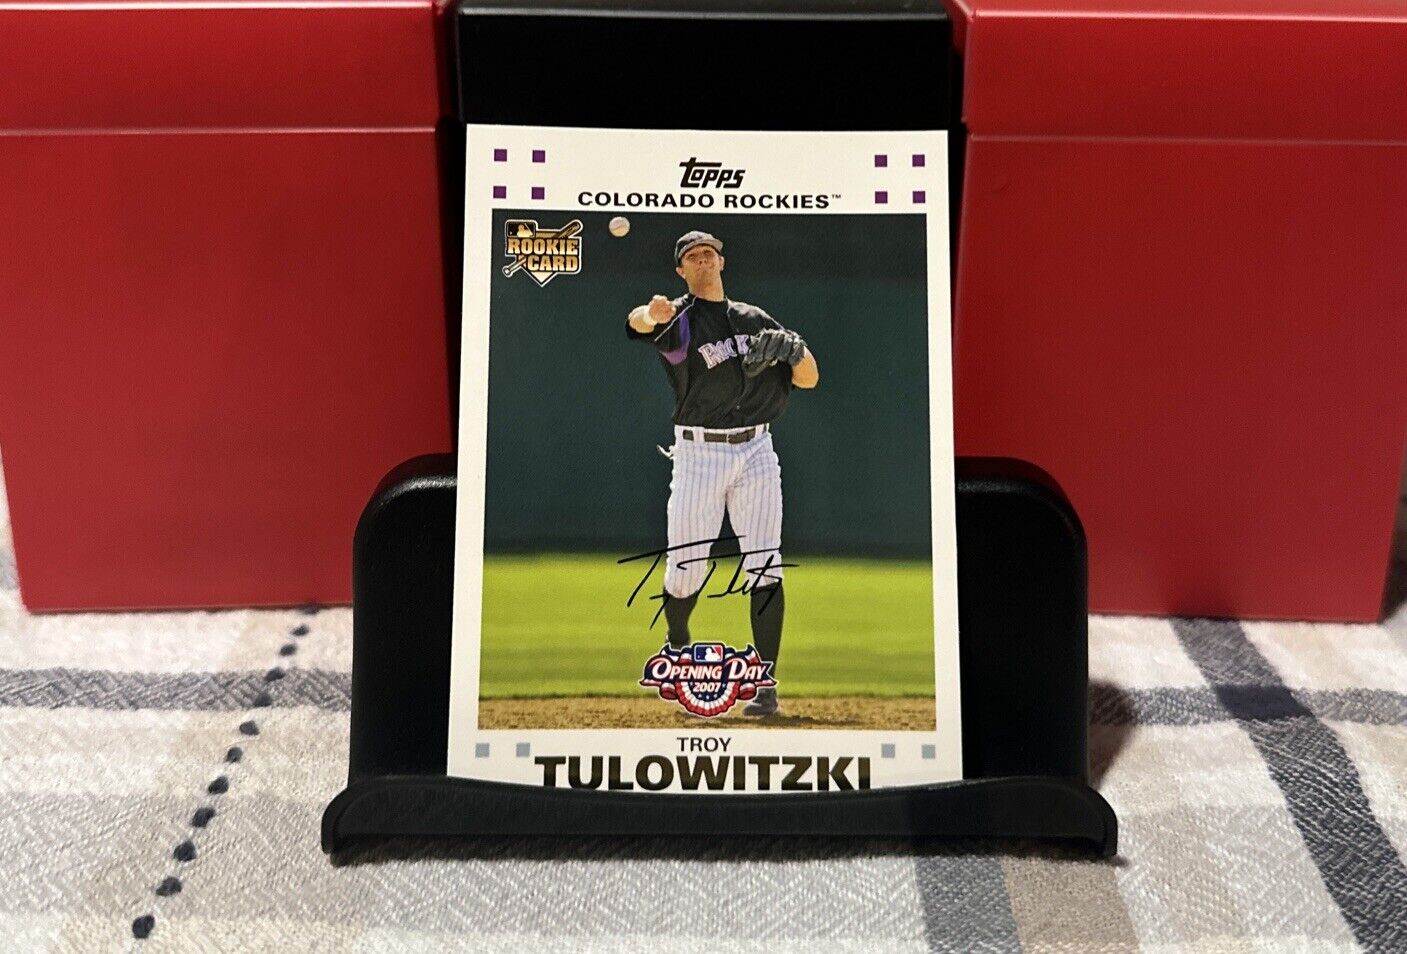 2007 Topps Opening Day  Troy Tulowitzki Gold Parallel RC #/2007 